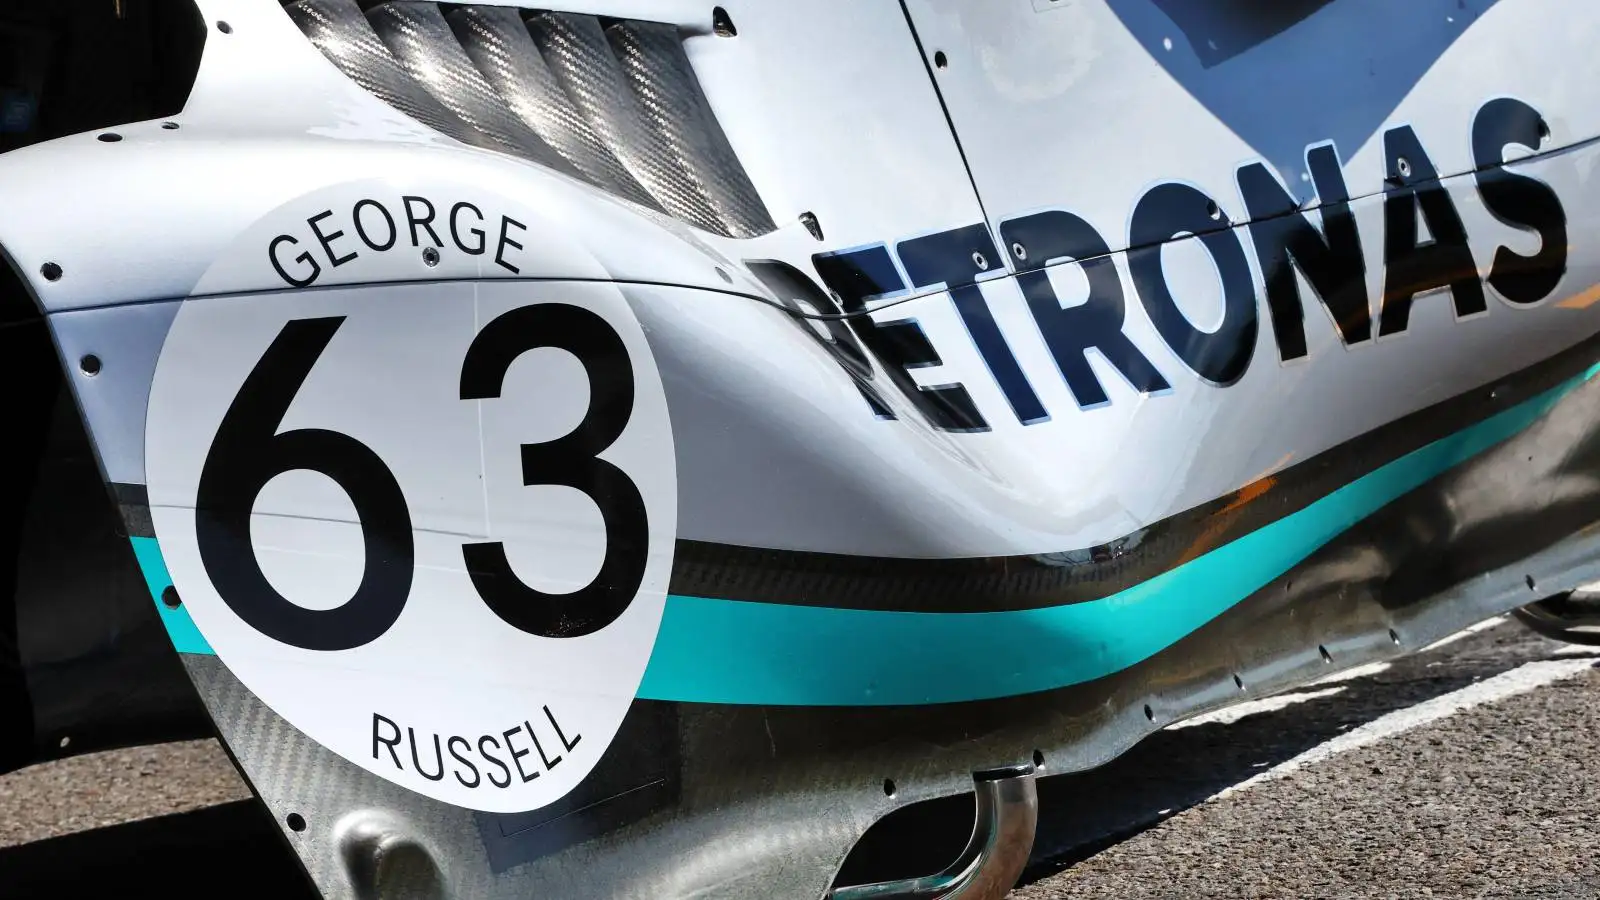 The Mercedes W13 of George Russell sporting a tribute logo. Belgium, August 2022.